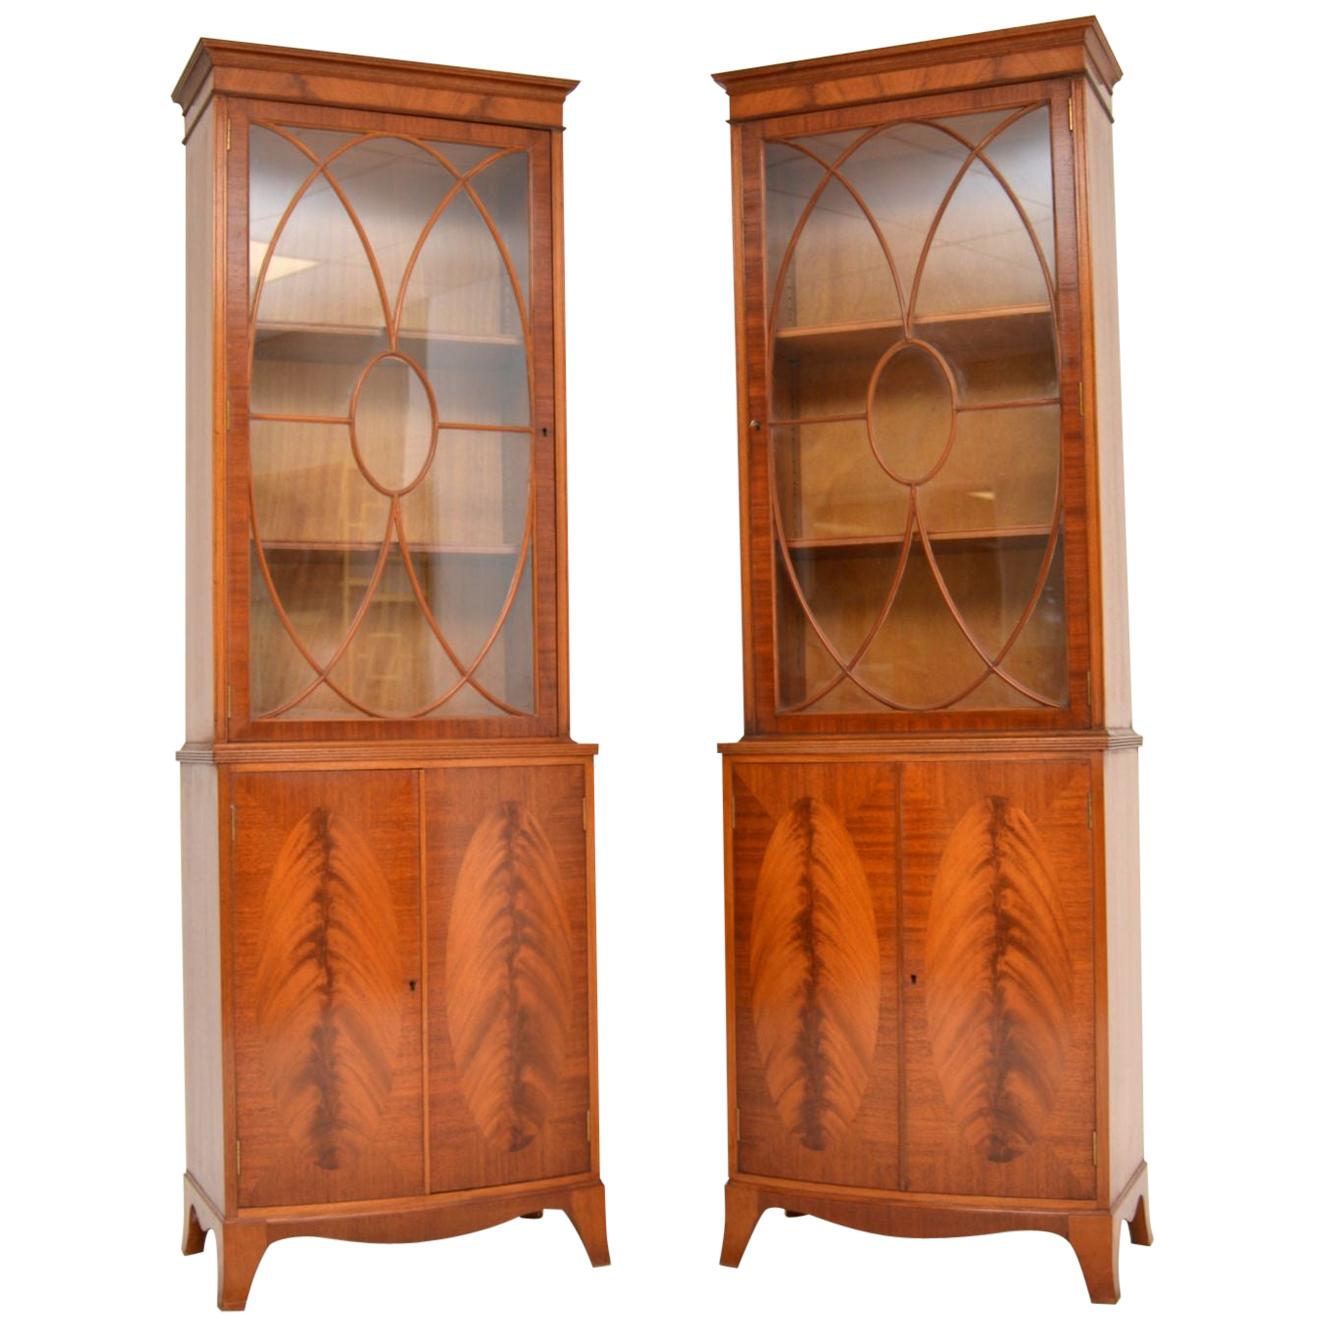 Pair of Antique Mahogany Waring and Gillows Bookcases